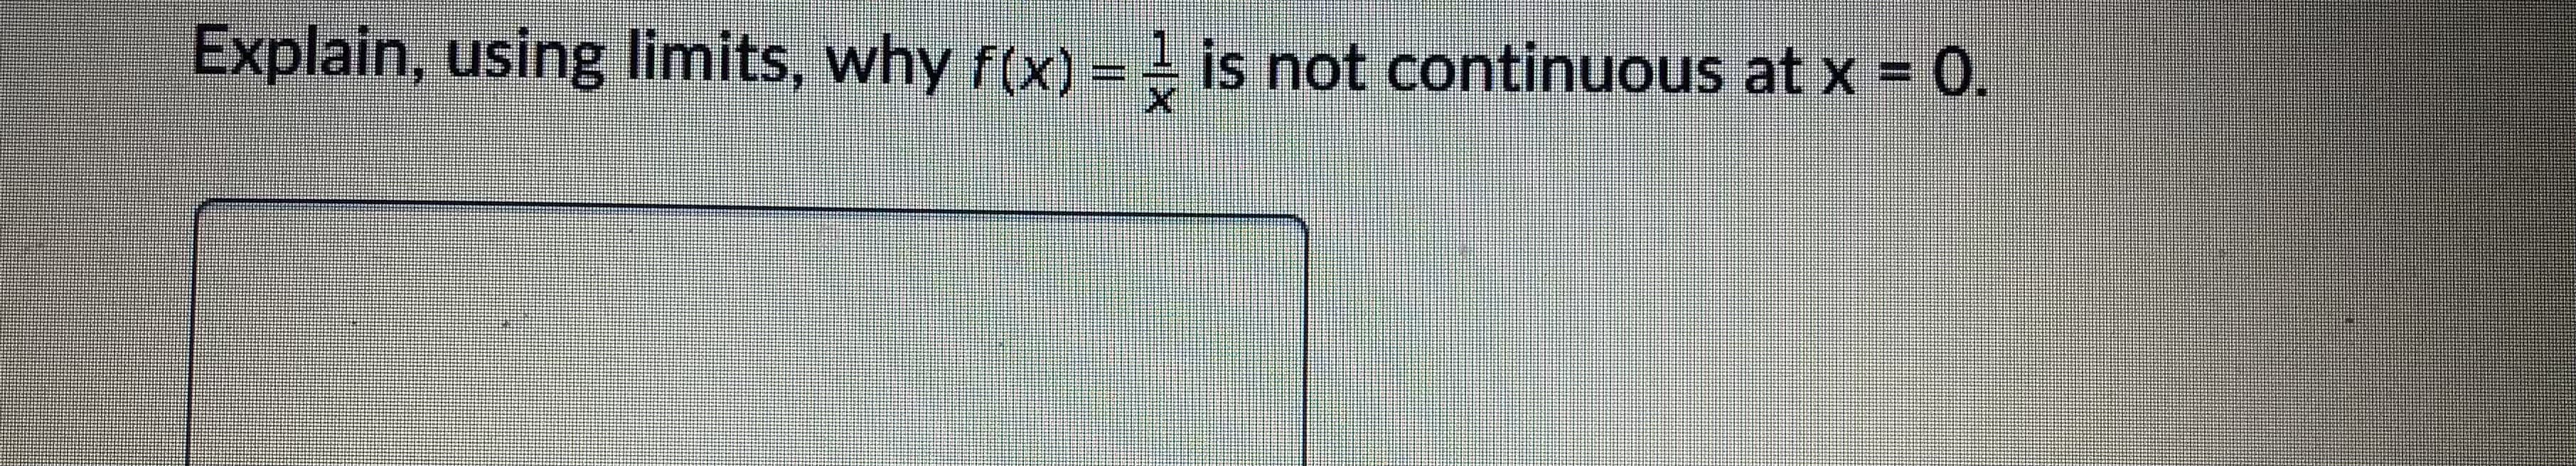 Explain, using limits, why f(x) = - is not continuous at x = 0.
